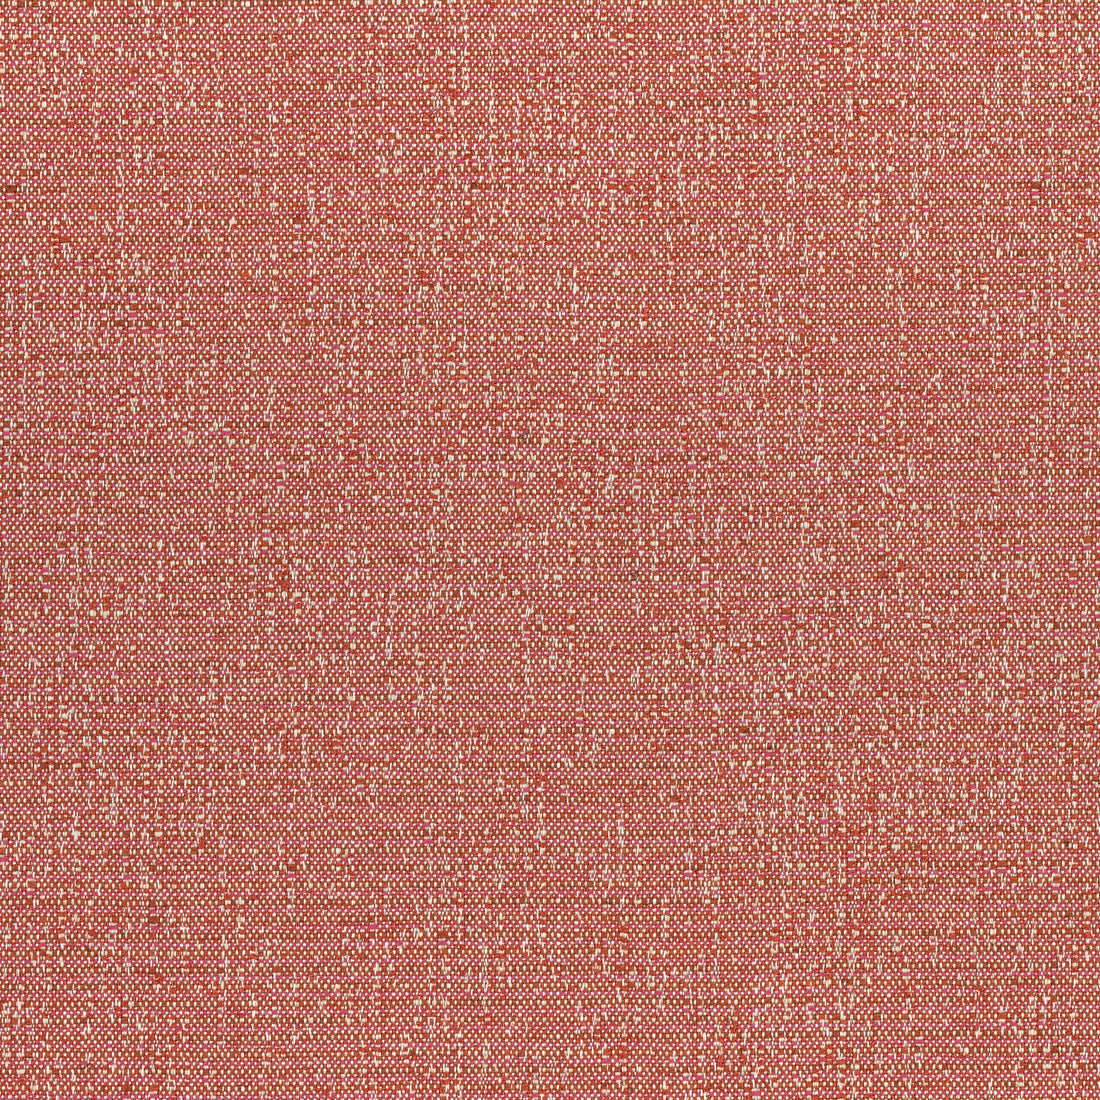 Everly fabric in persimmon color - pattern number W74058 - by Thibaut in the Cadence collection